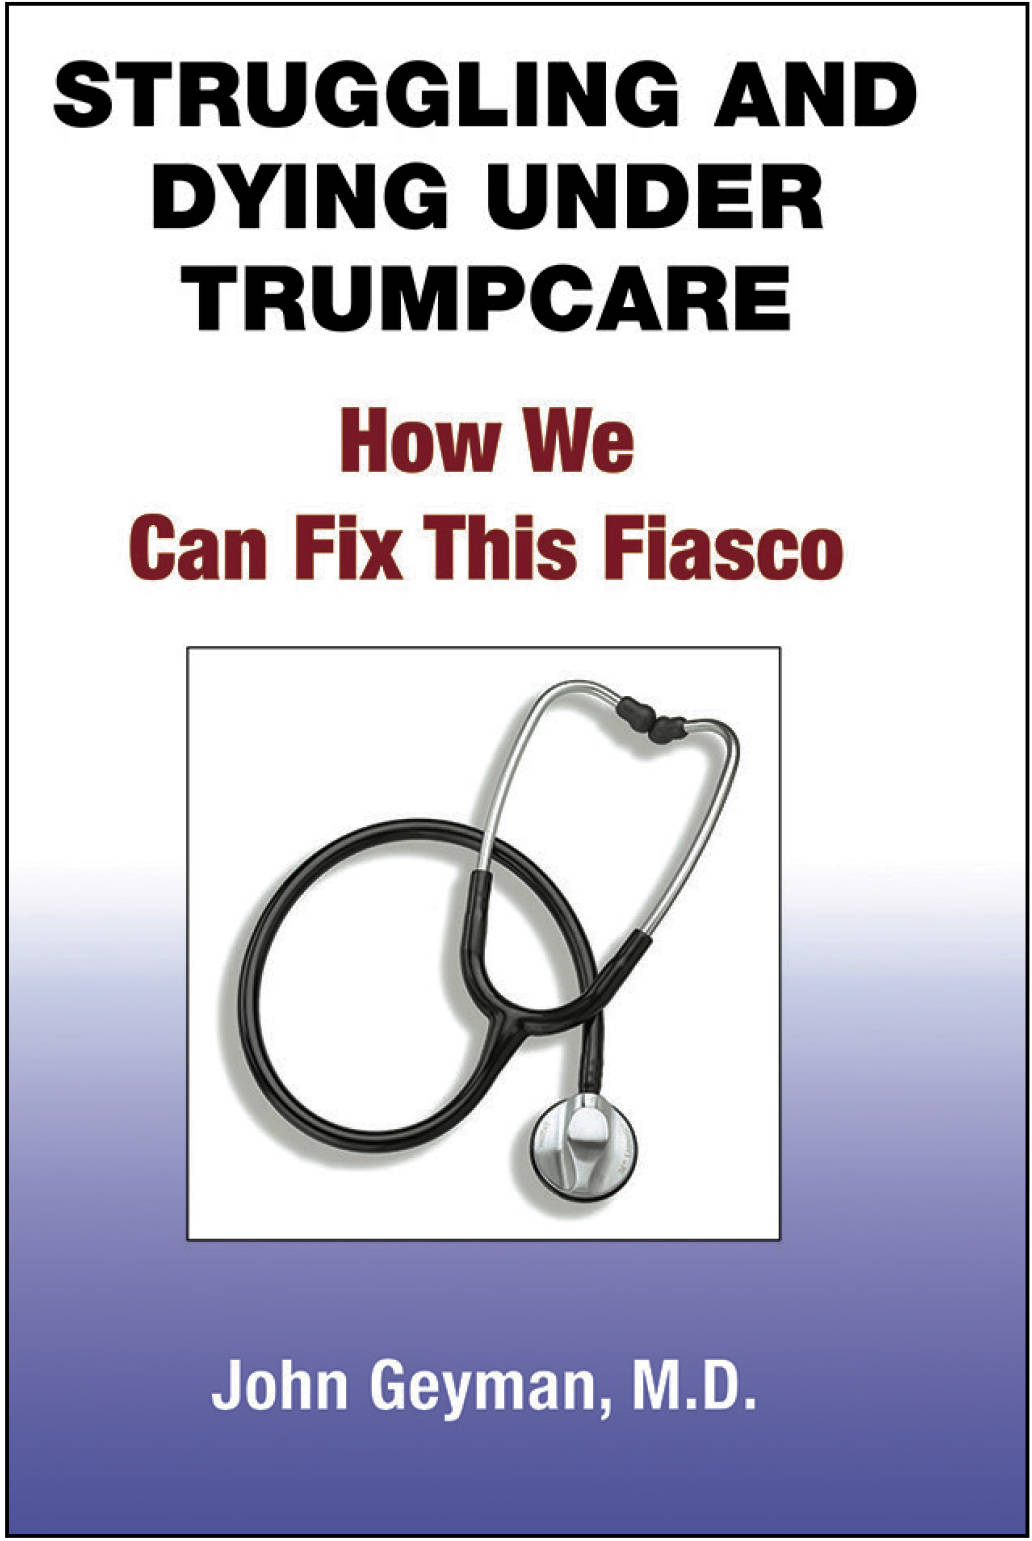 ‘Struggling and Dying Under Trumpcare: How We Can Fix This Fiasco’ book released